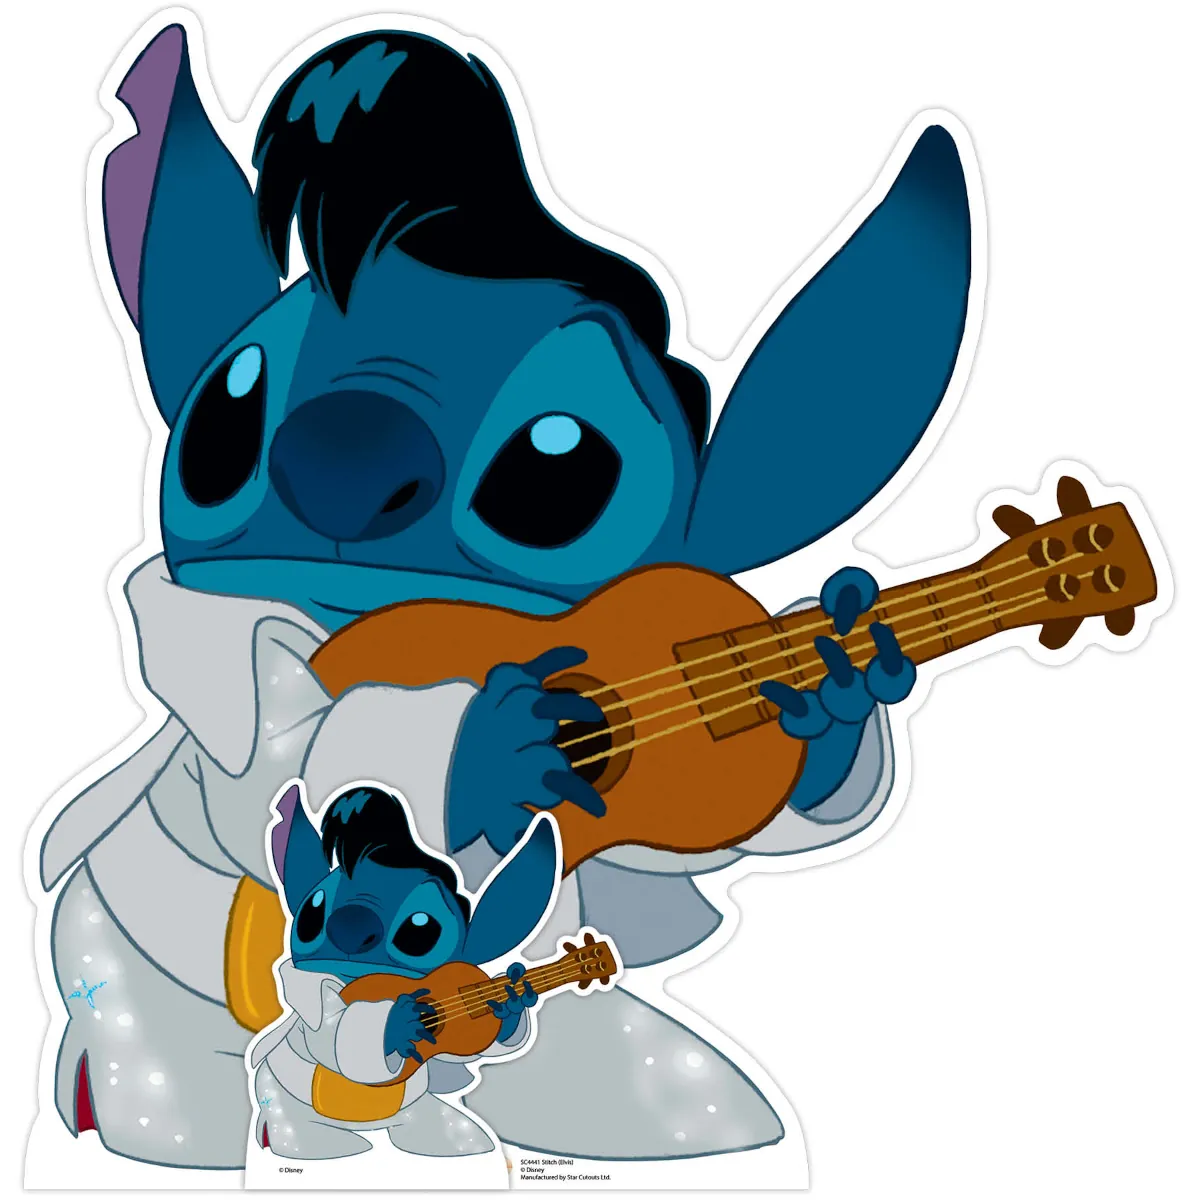 SC4441 Stitch 'Dressed As Elvis' (Lilo & Stitch) Official Lifesize + Mini Cardboard Cutout Standee Front